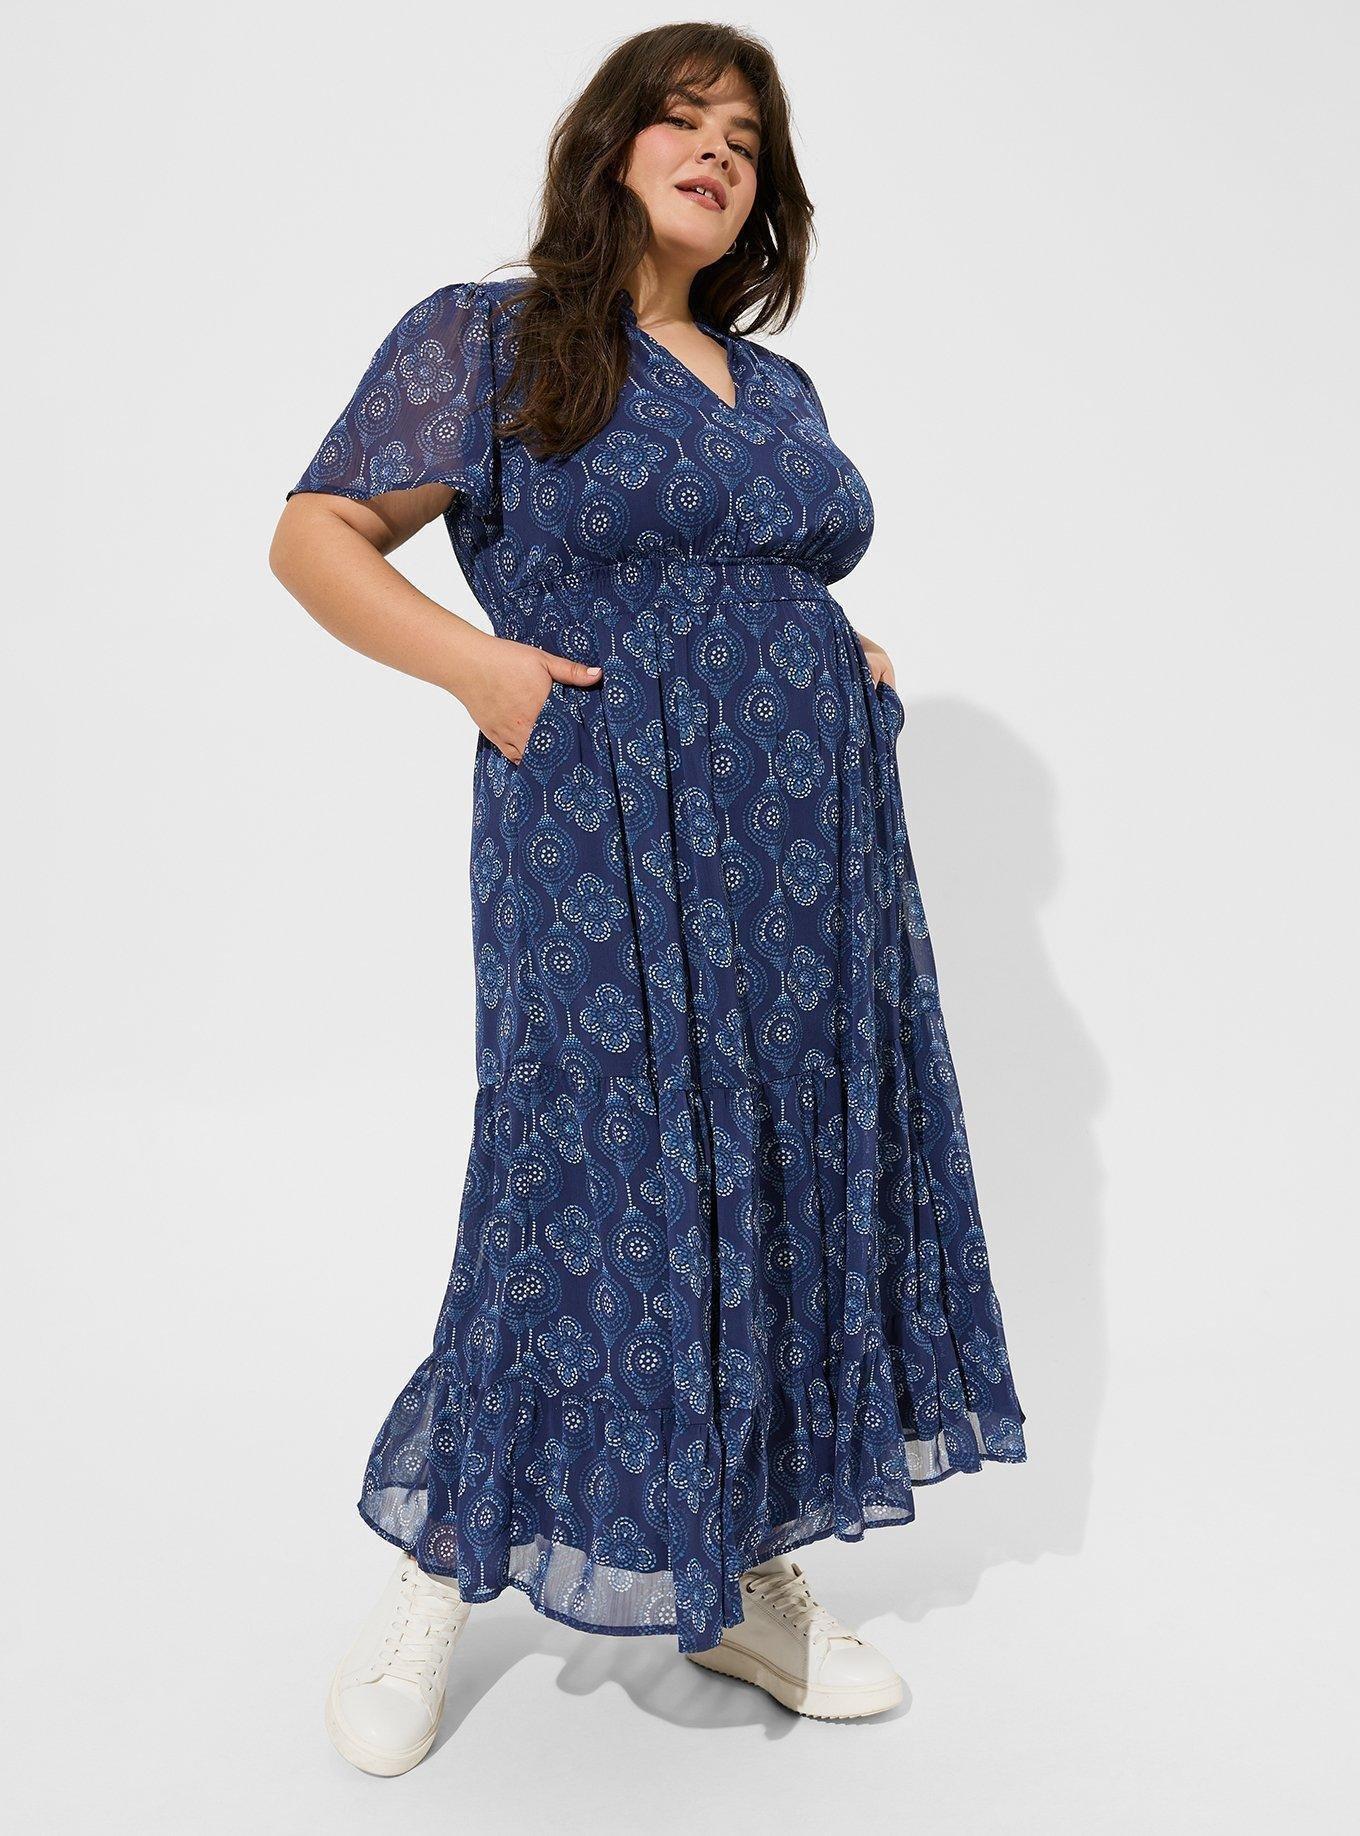 Plus Size Clothing in Halifax, NS at Torrid